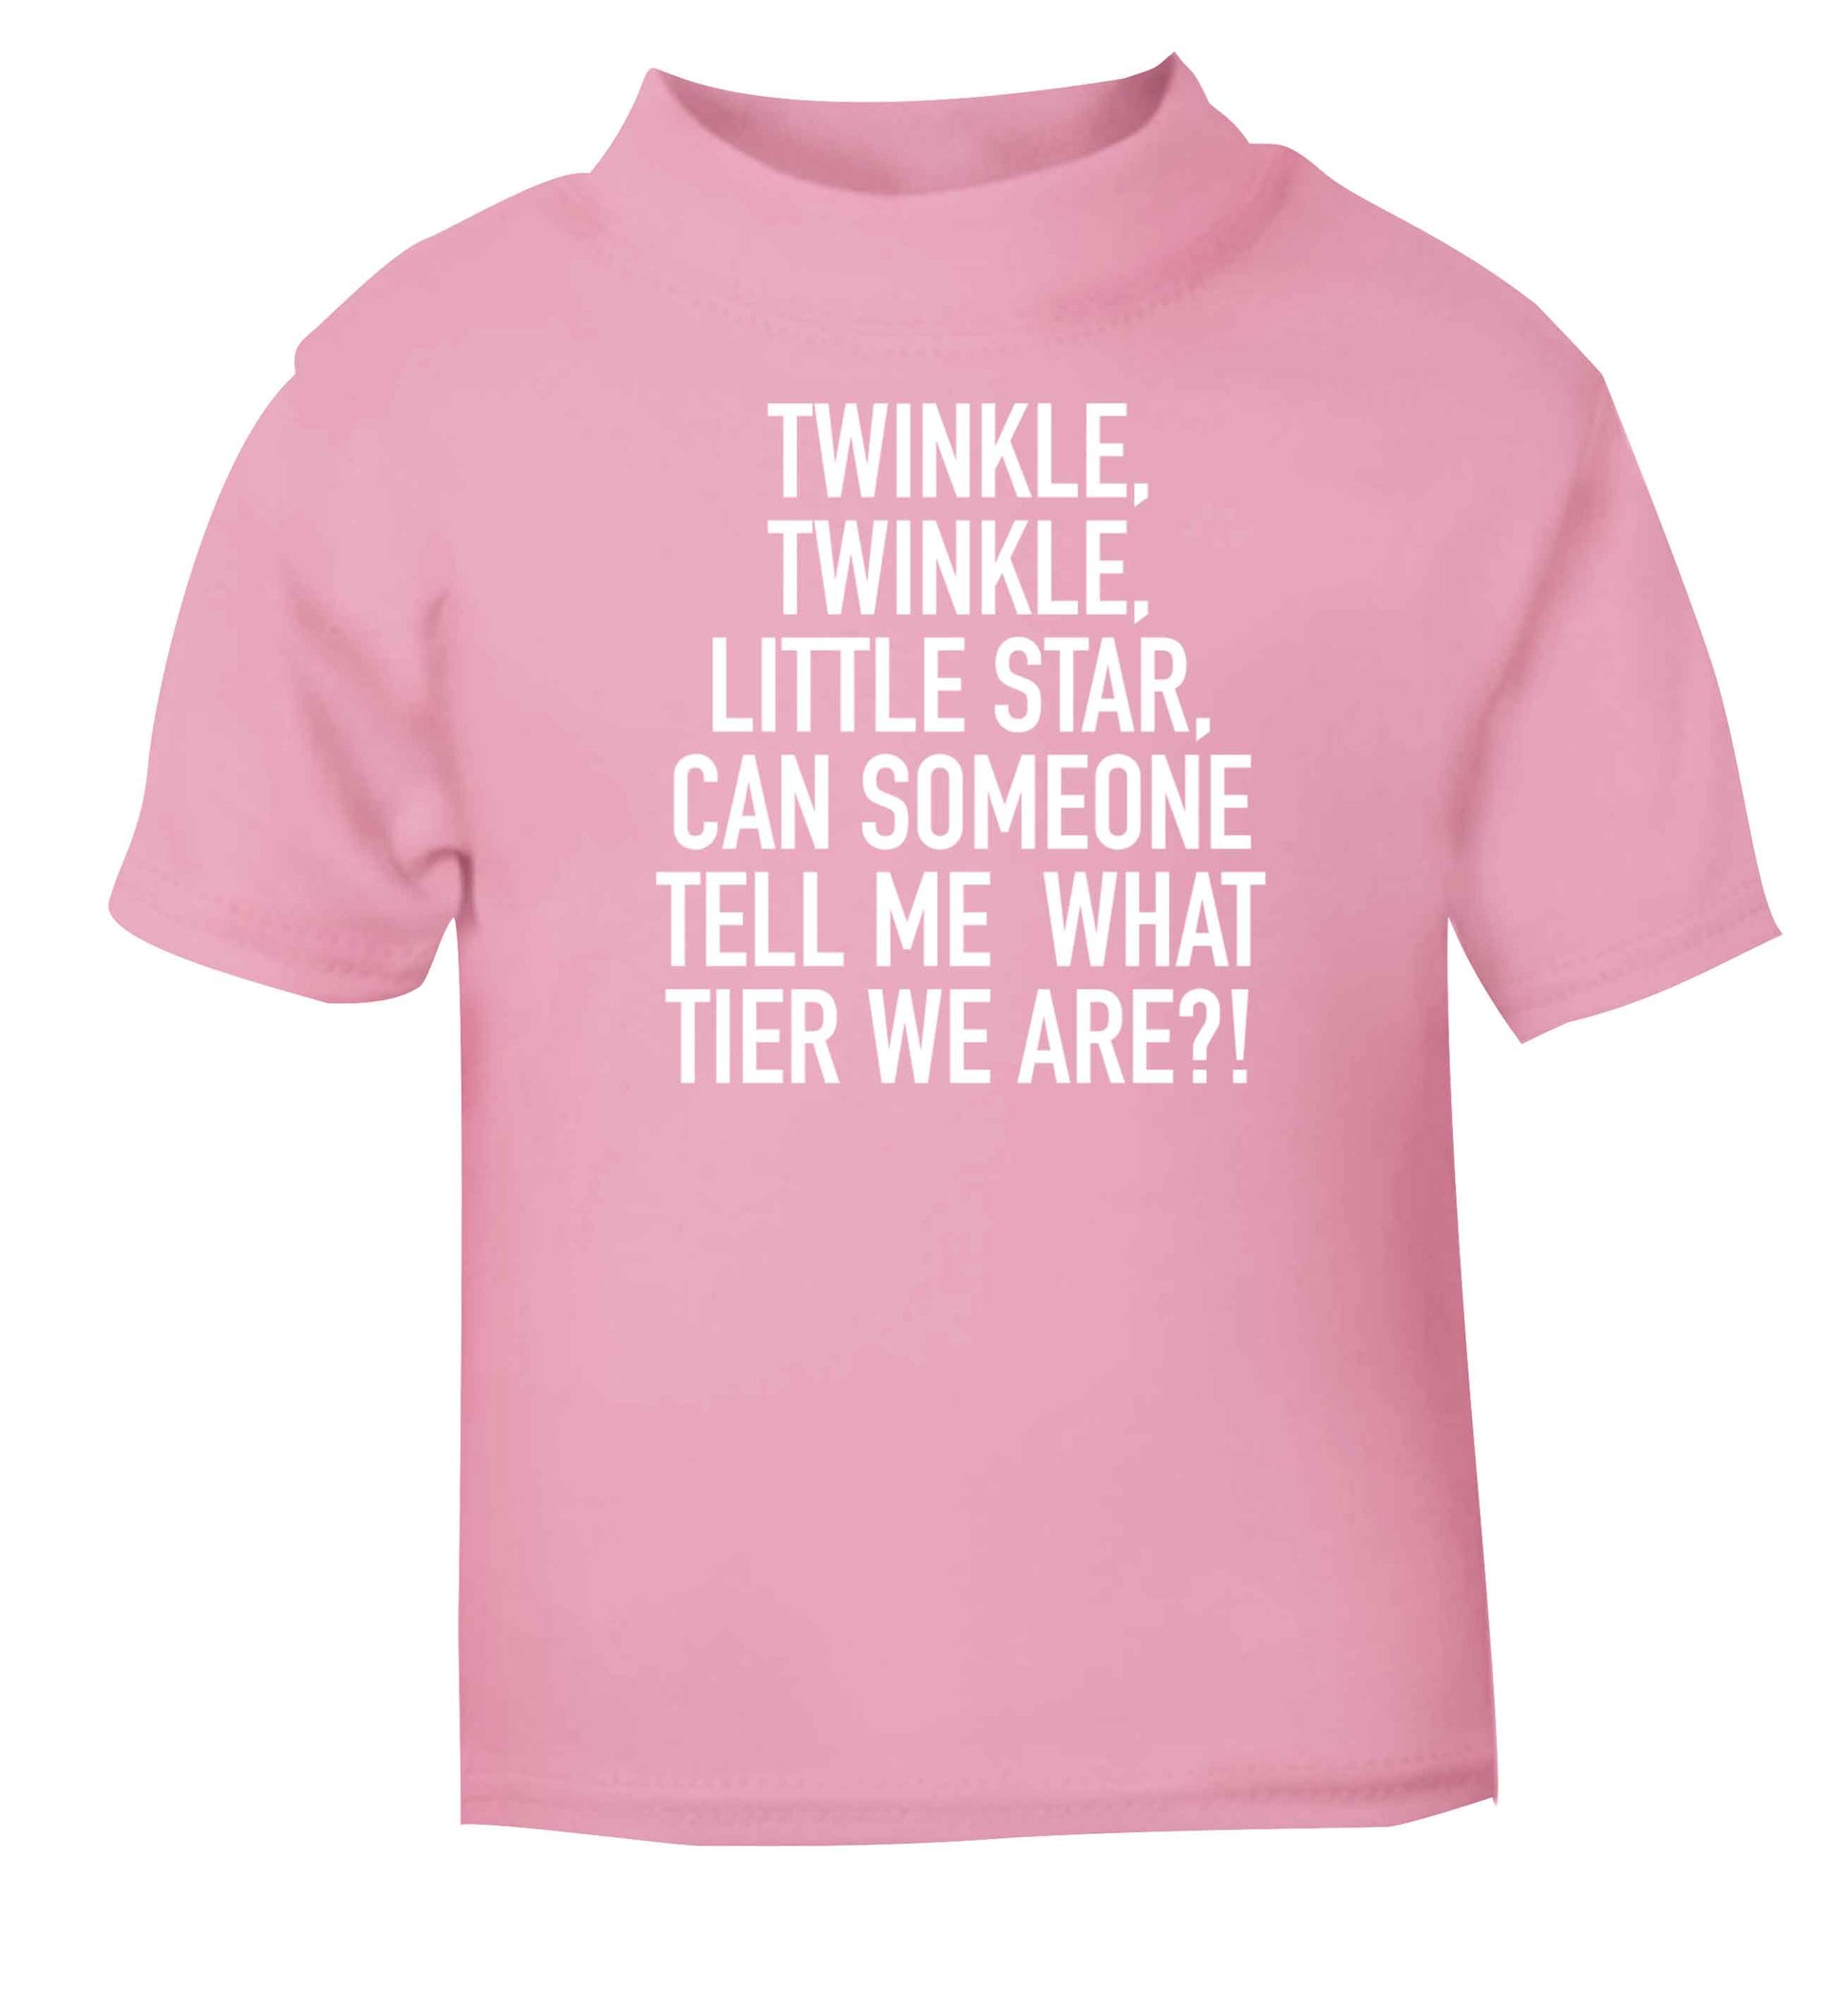 Twinkle twinkle, little star does anyone know what tier we are? light pink baby toddler Tshirt 2 Years